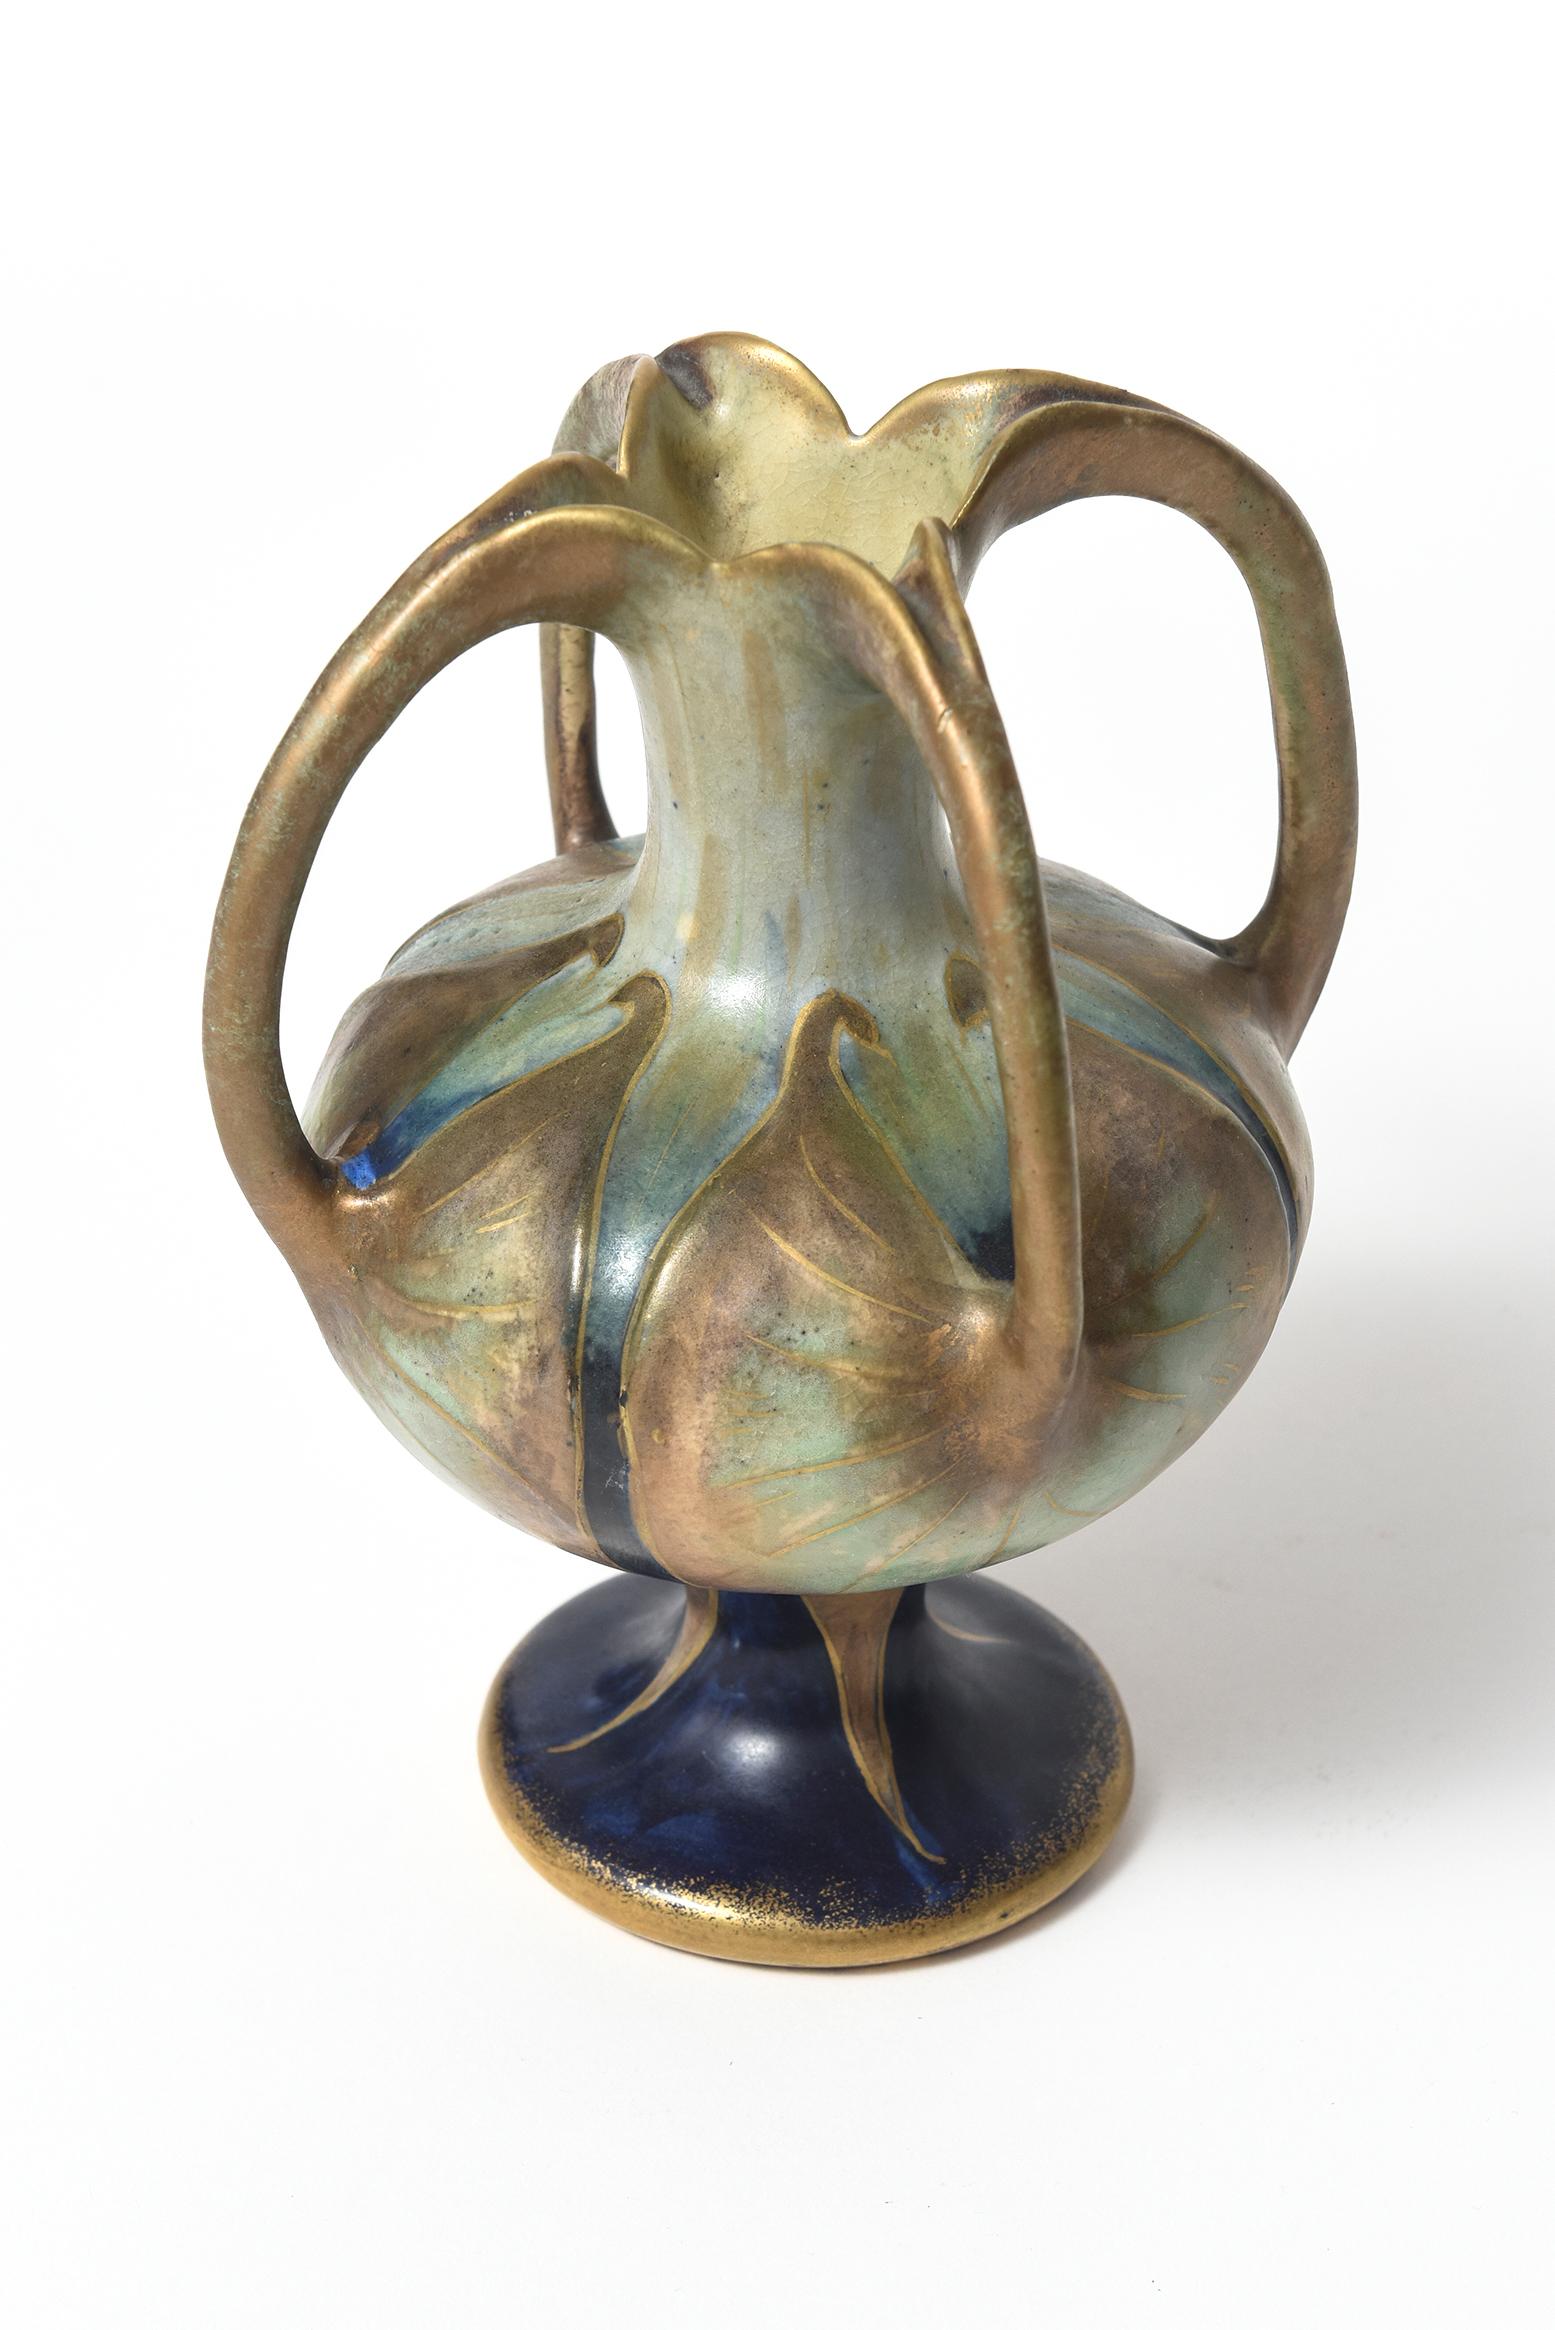 Paul Dachsel Amphora Art Nouveau Four Handle Lily Gold Blue Green Pottery Vase In Good Condition For Sale In Miami Beach, FL